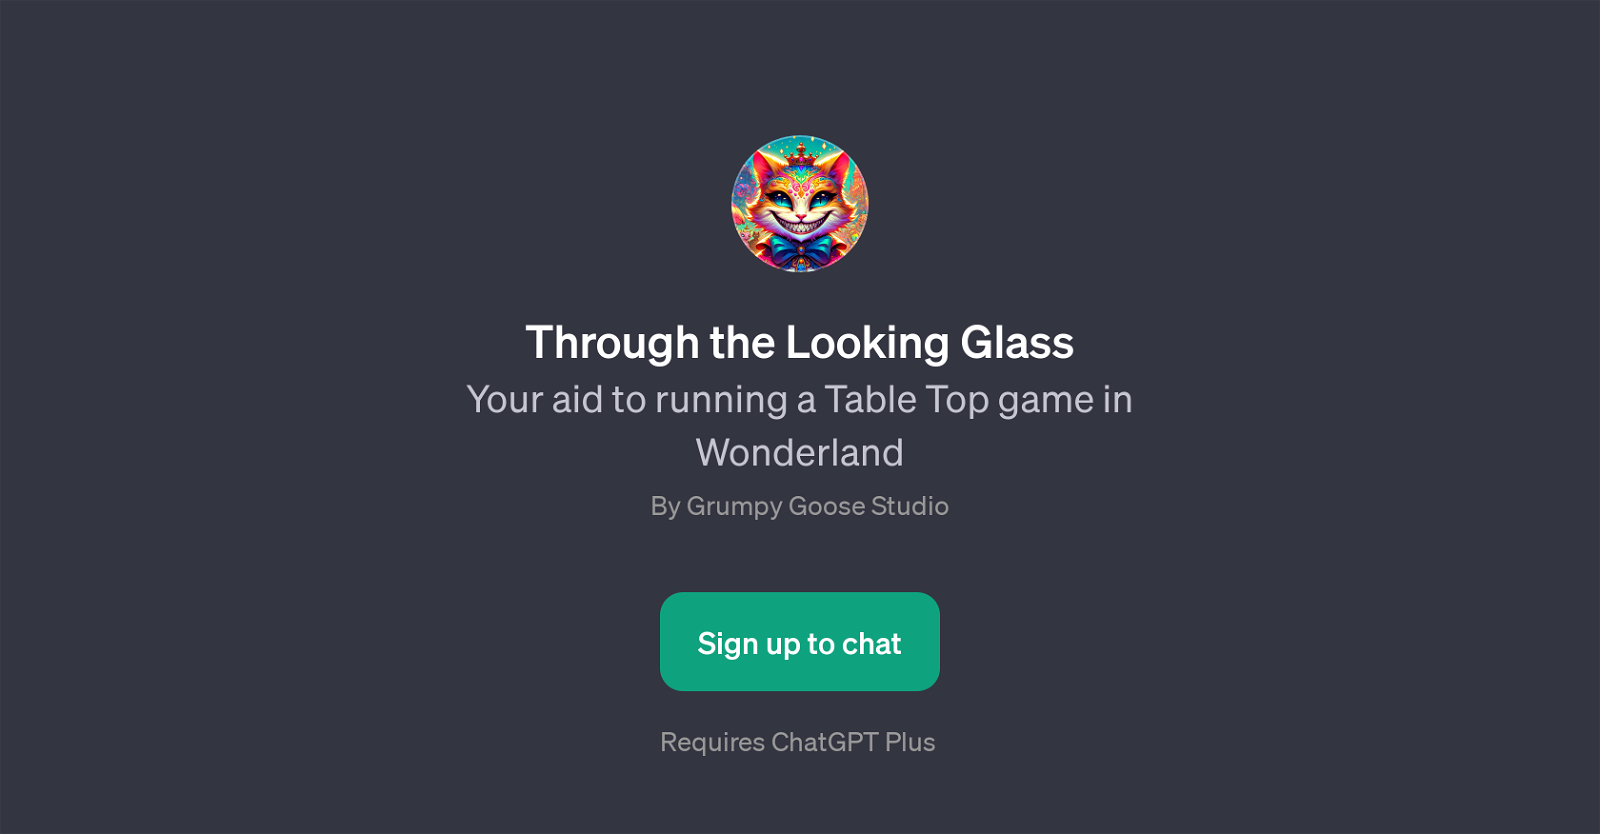 Through the Looking Glass website